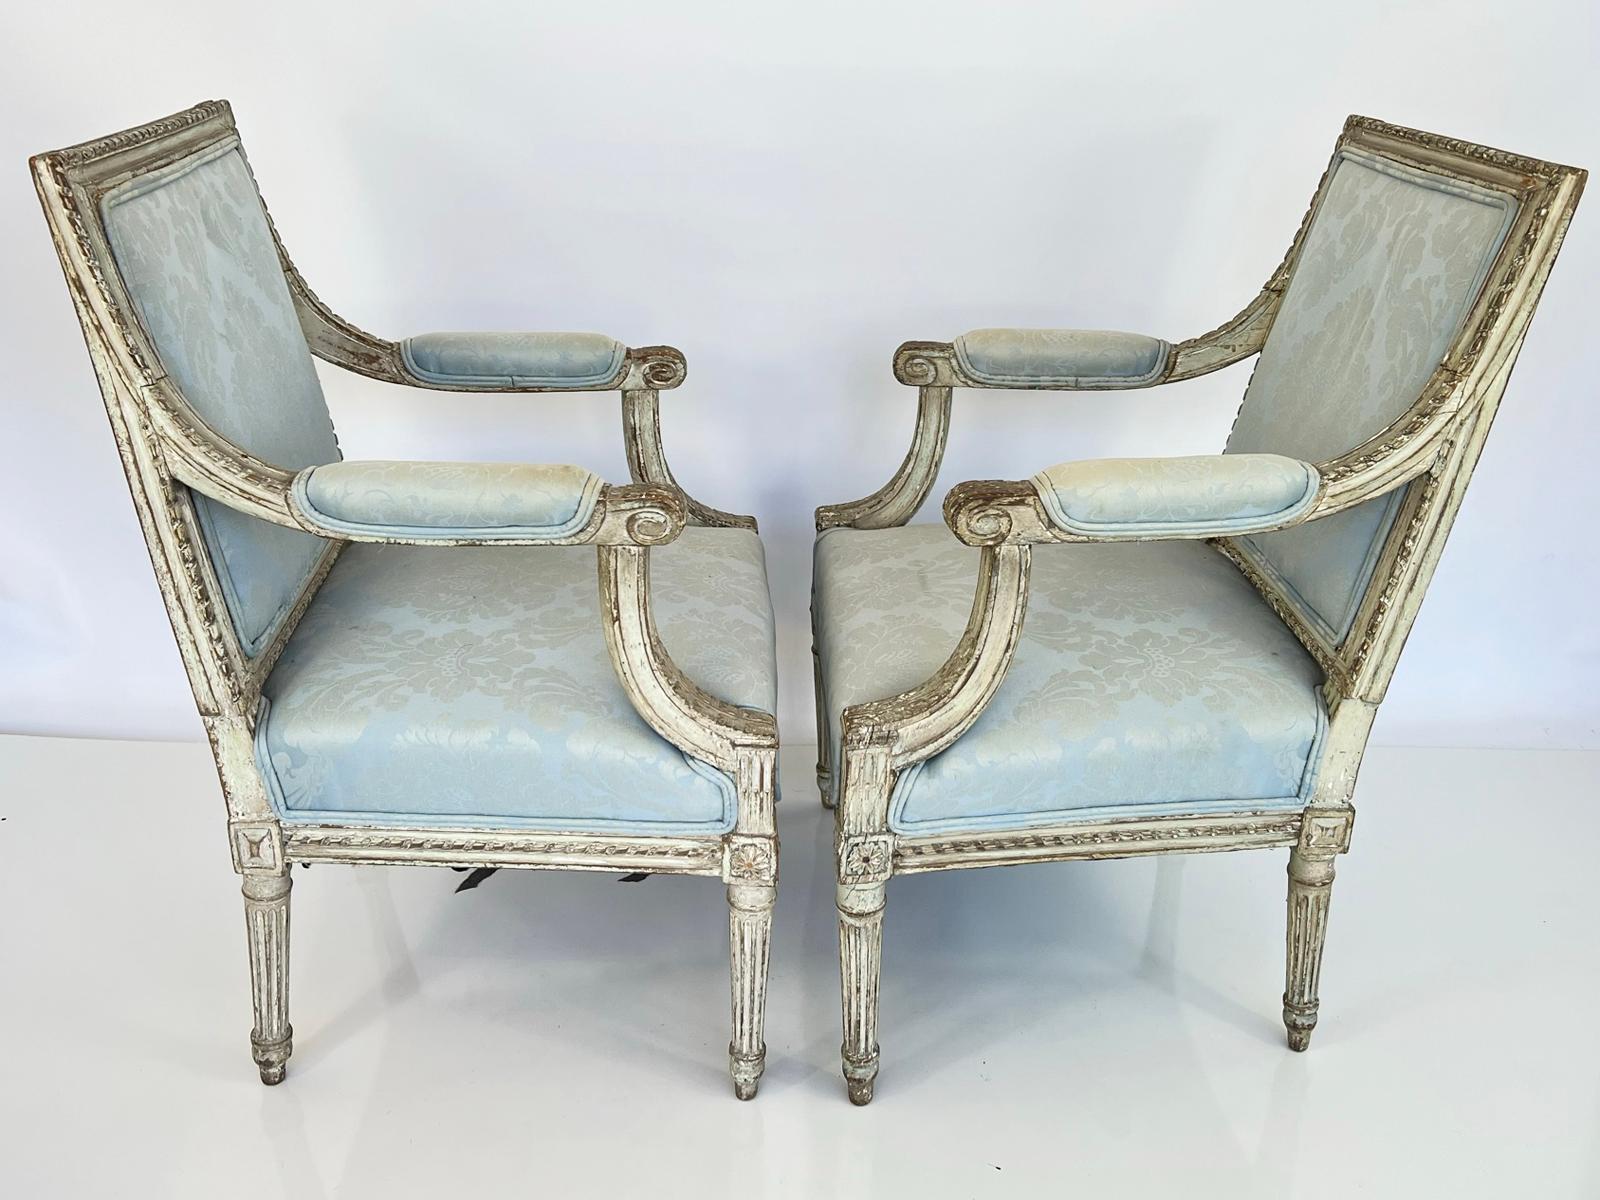 Louis XVI Pair of 18th/19th Century French Carved Fauteuils For Sale